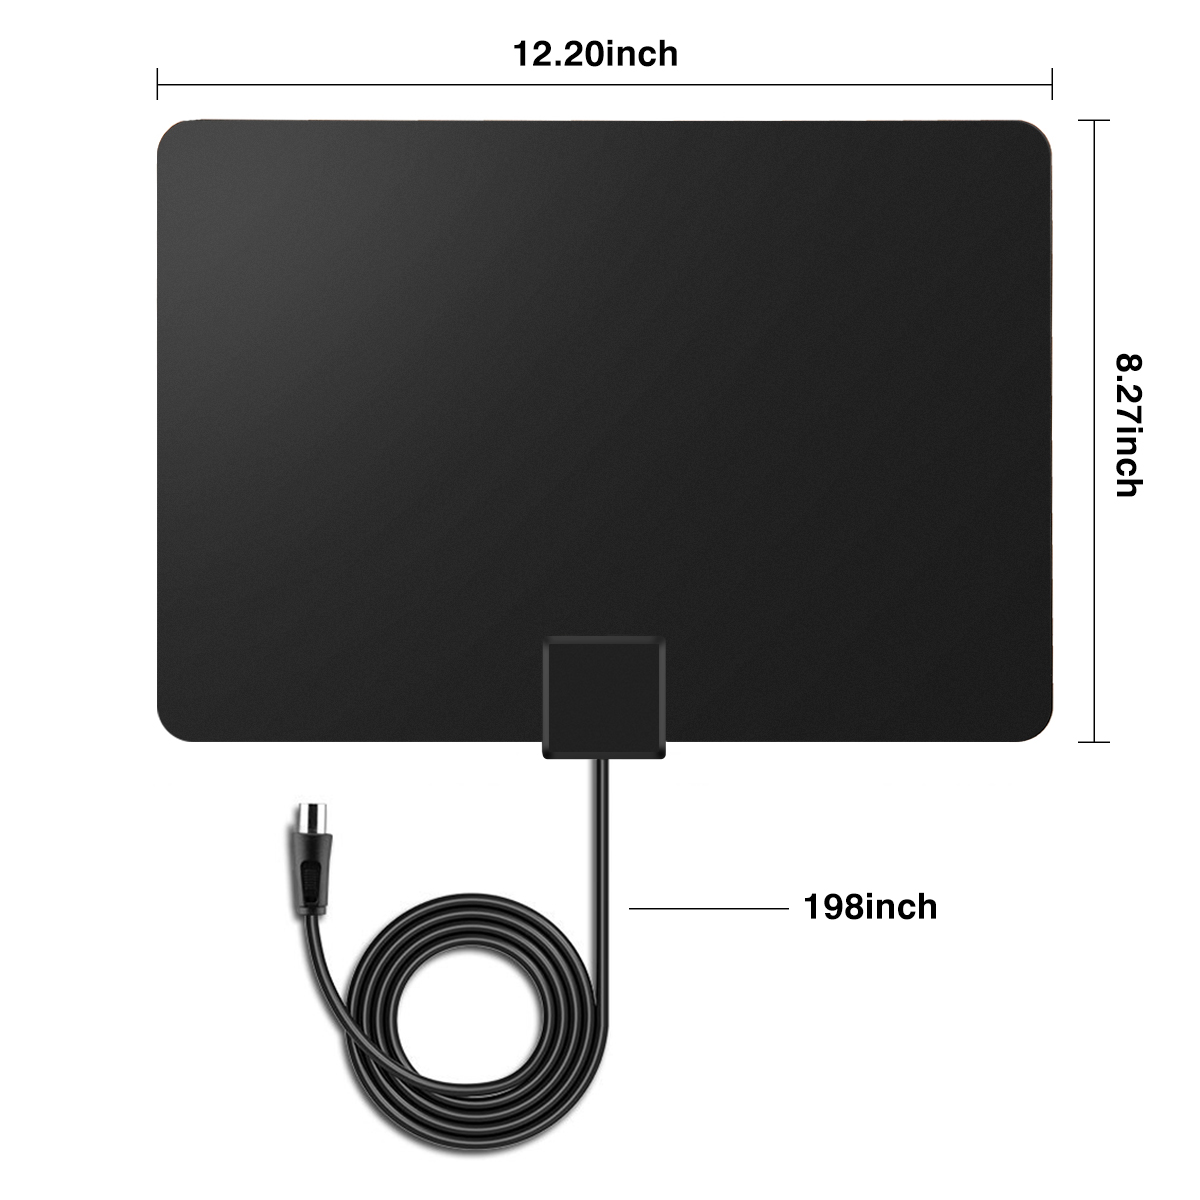 MECO-TV-Antenna-Indoor-TV-Antenna-Ultra-thin-Amplified-50-mile-digital-HDTV-antenna-with-amplifier-s-1974825-11